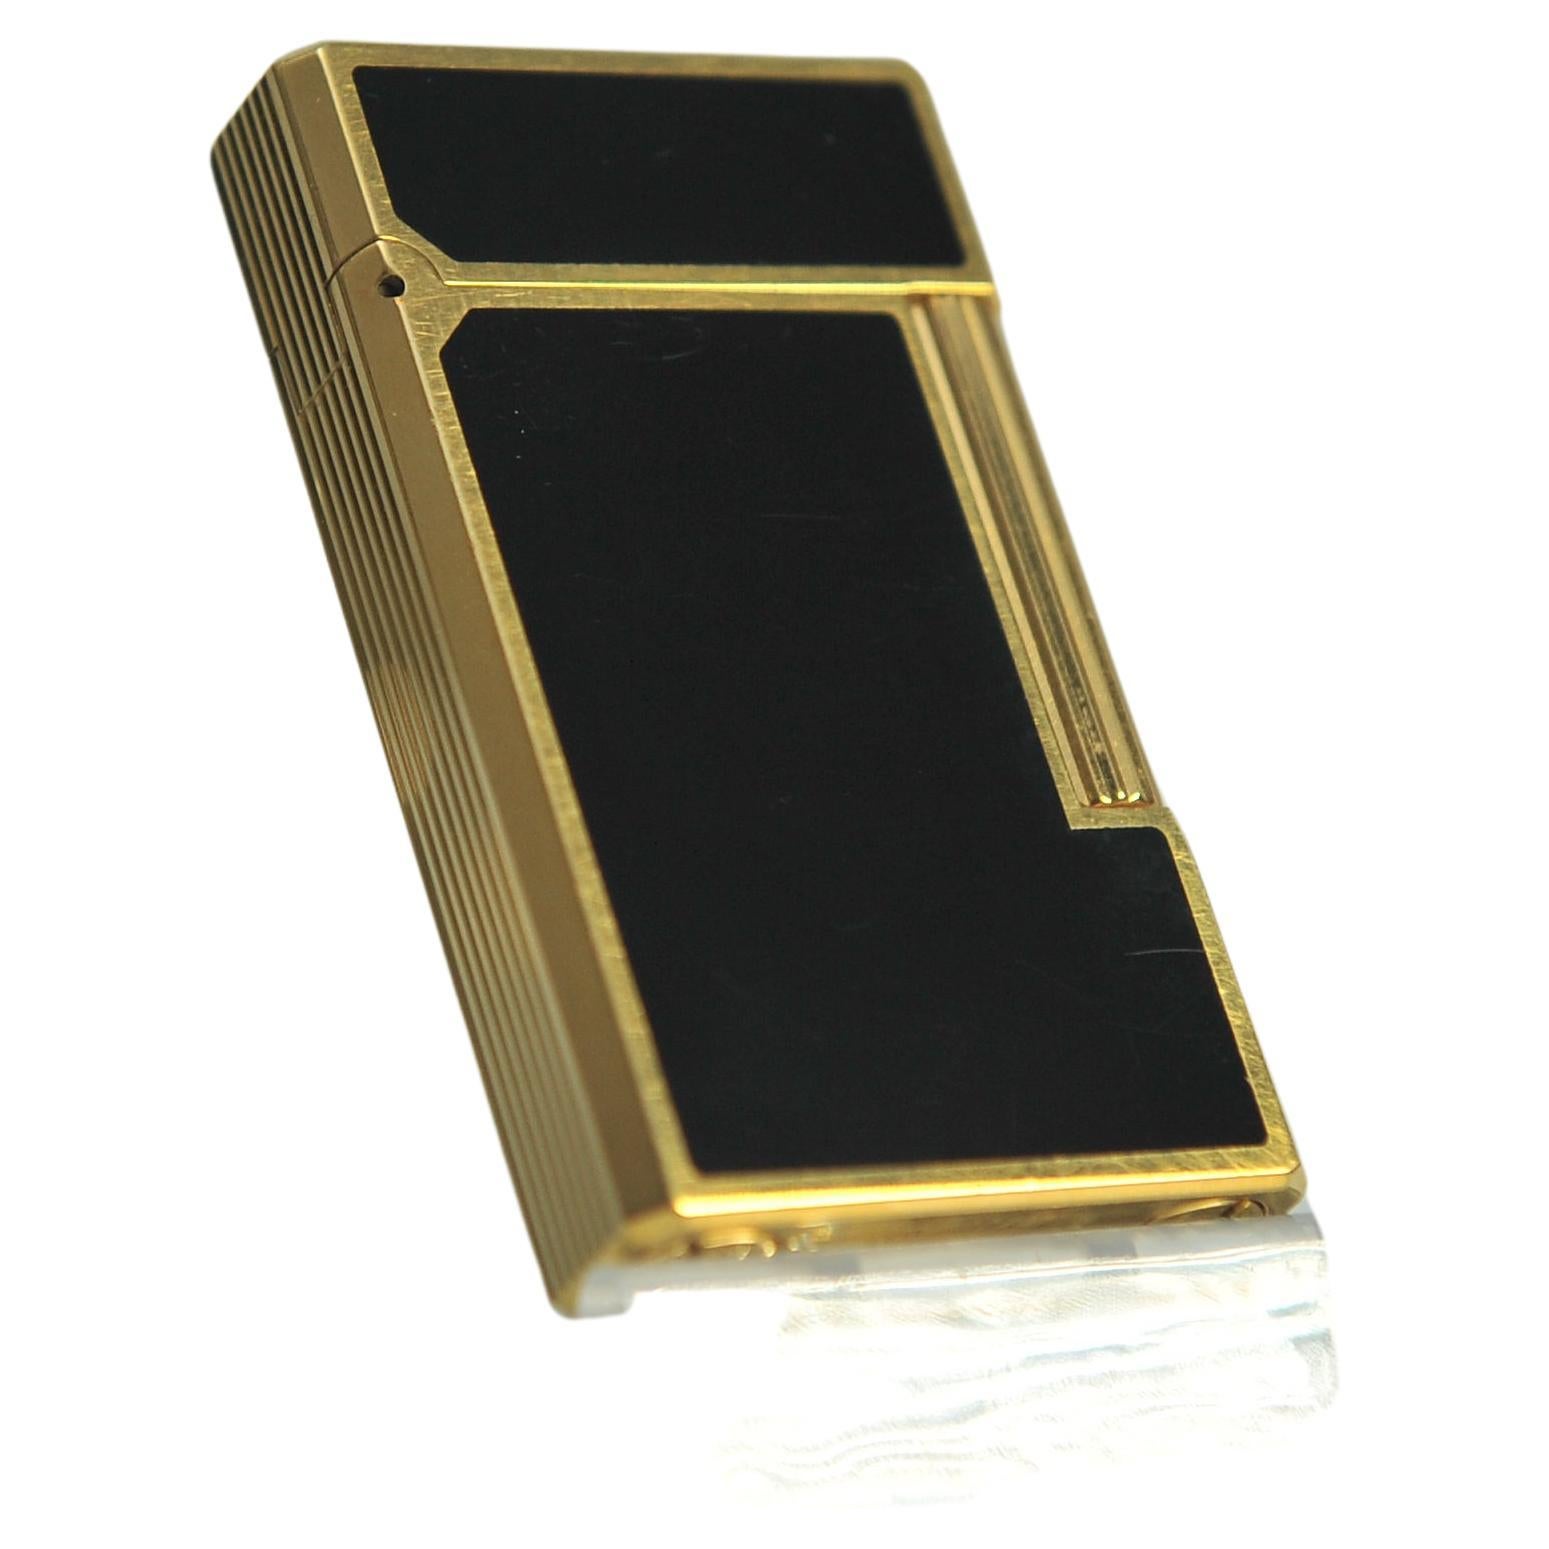 Lacquer Davidoff Laque De Chine Pocket Cigarette Lighter Made in France Stamped 1E9DY06  For Sale